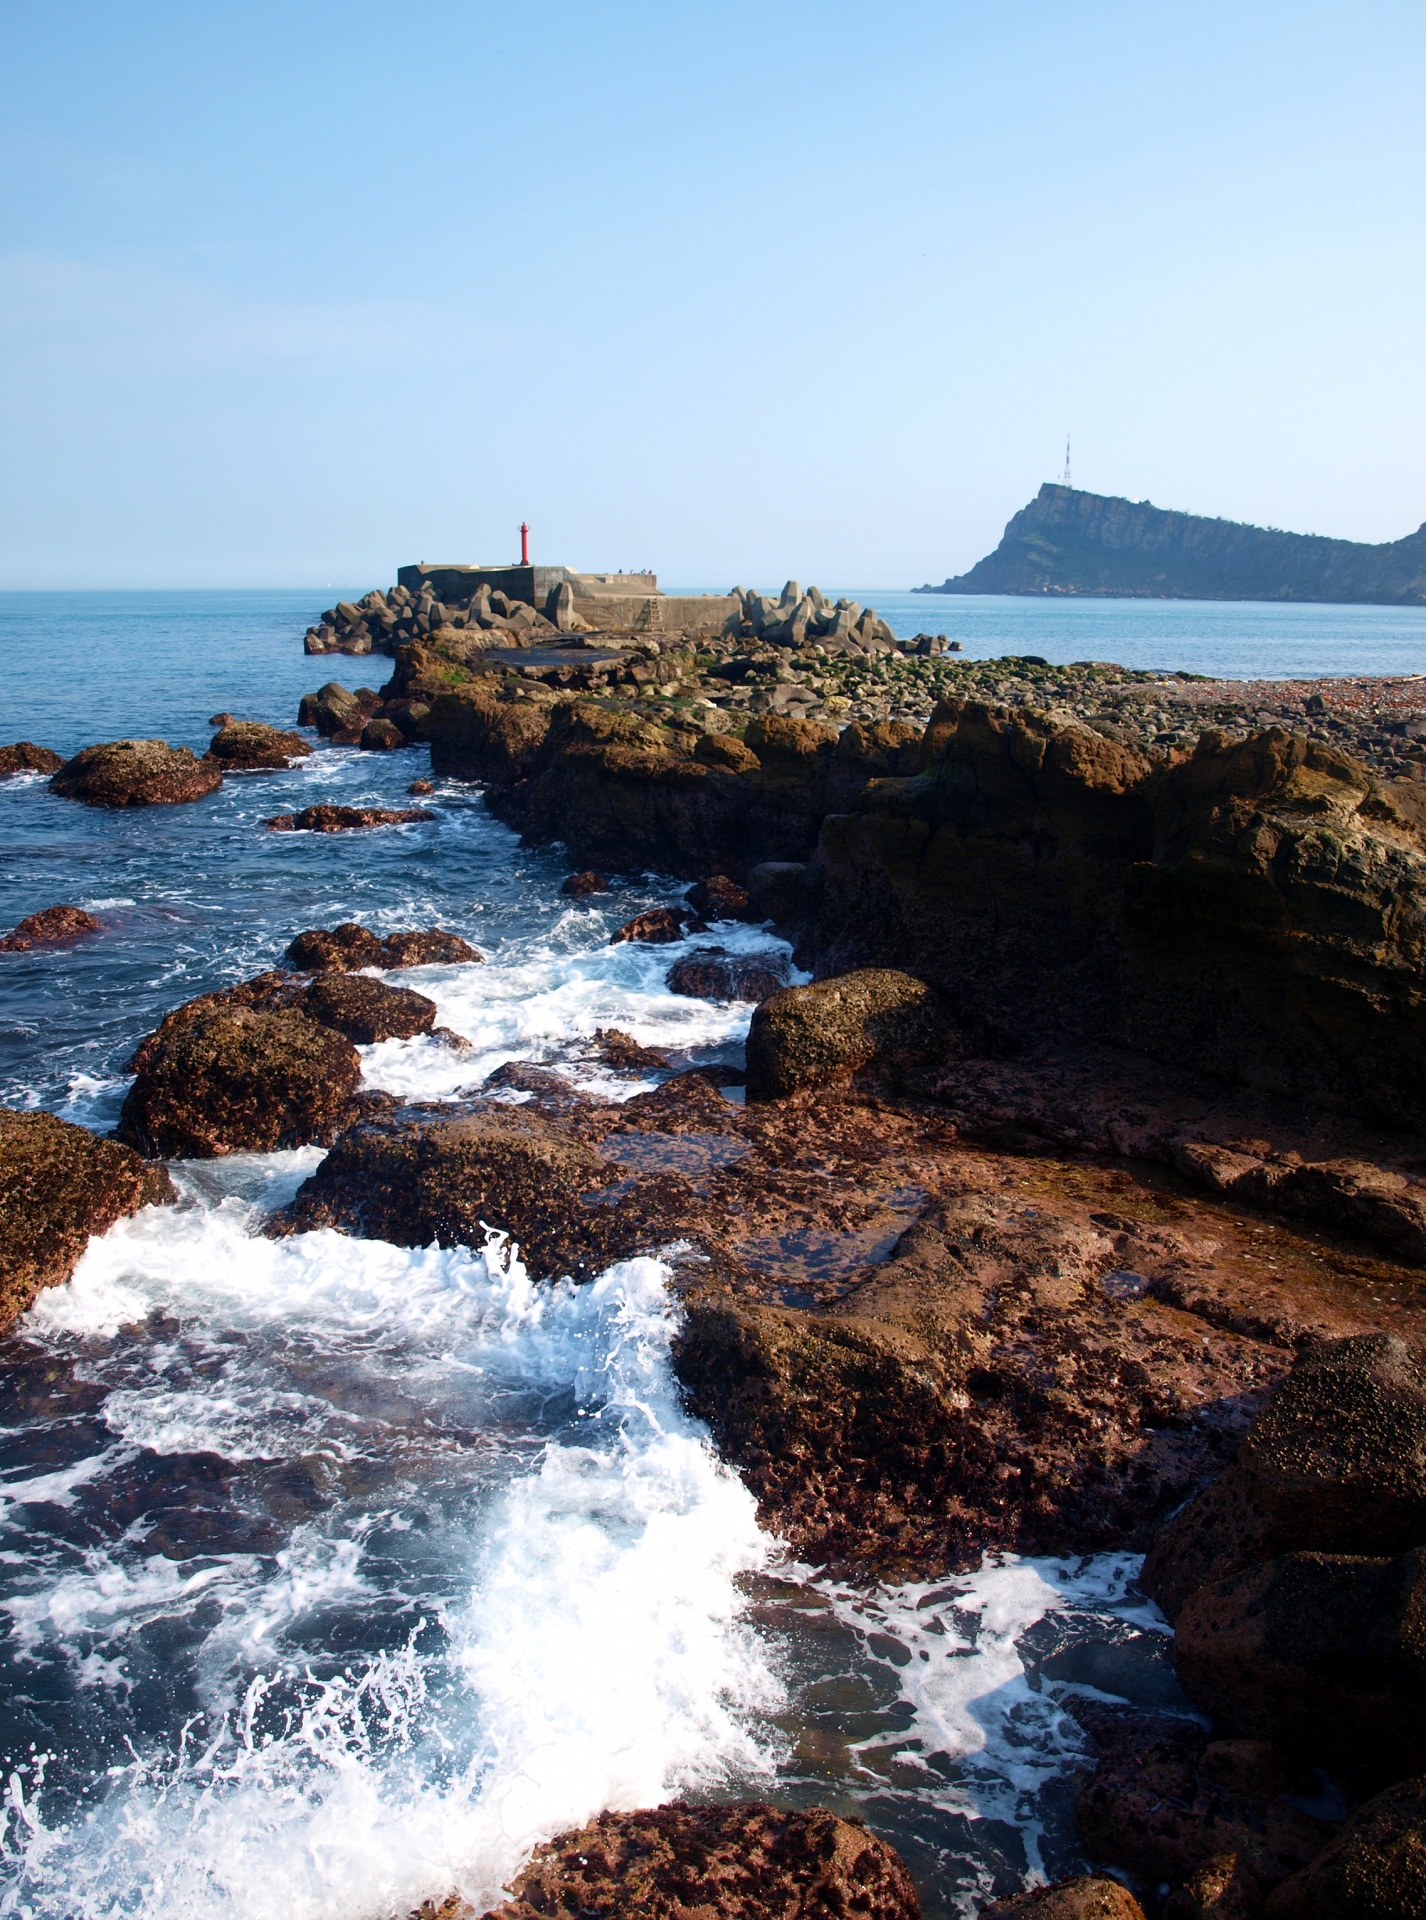 Rocky promontories, jutting out into the sea, Jinshan district, New Taipei, Taiwan